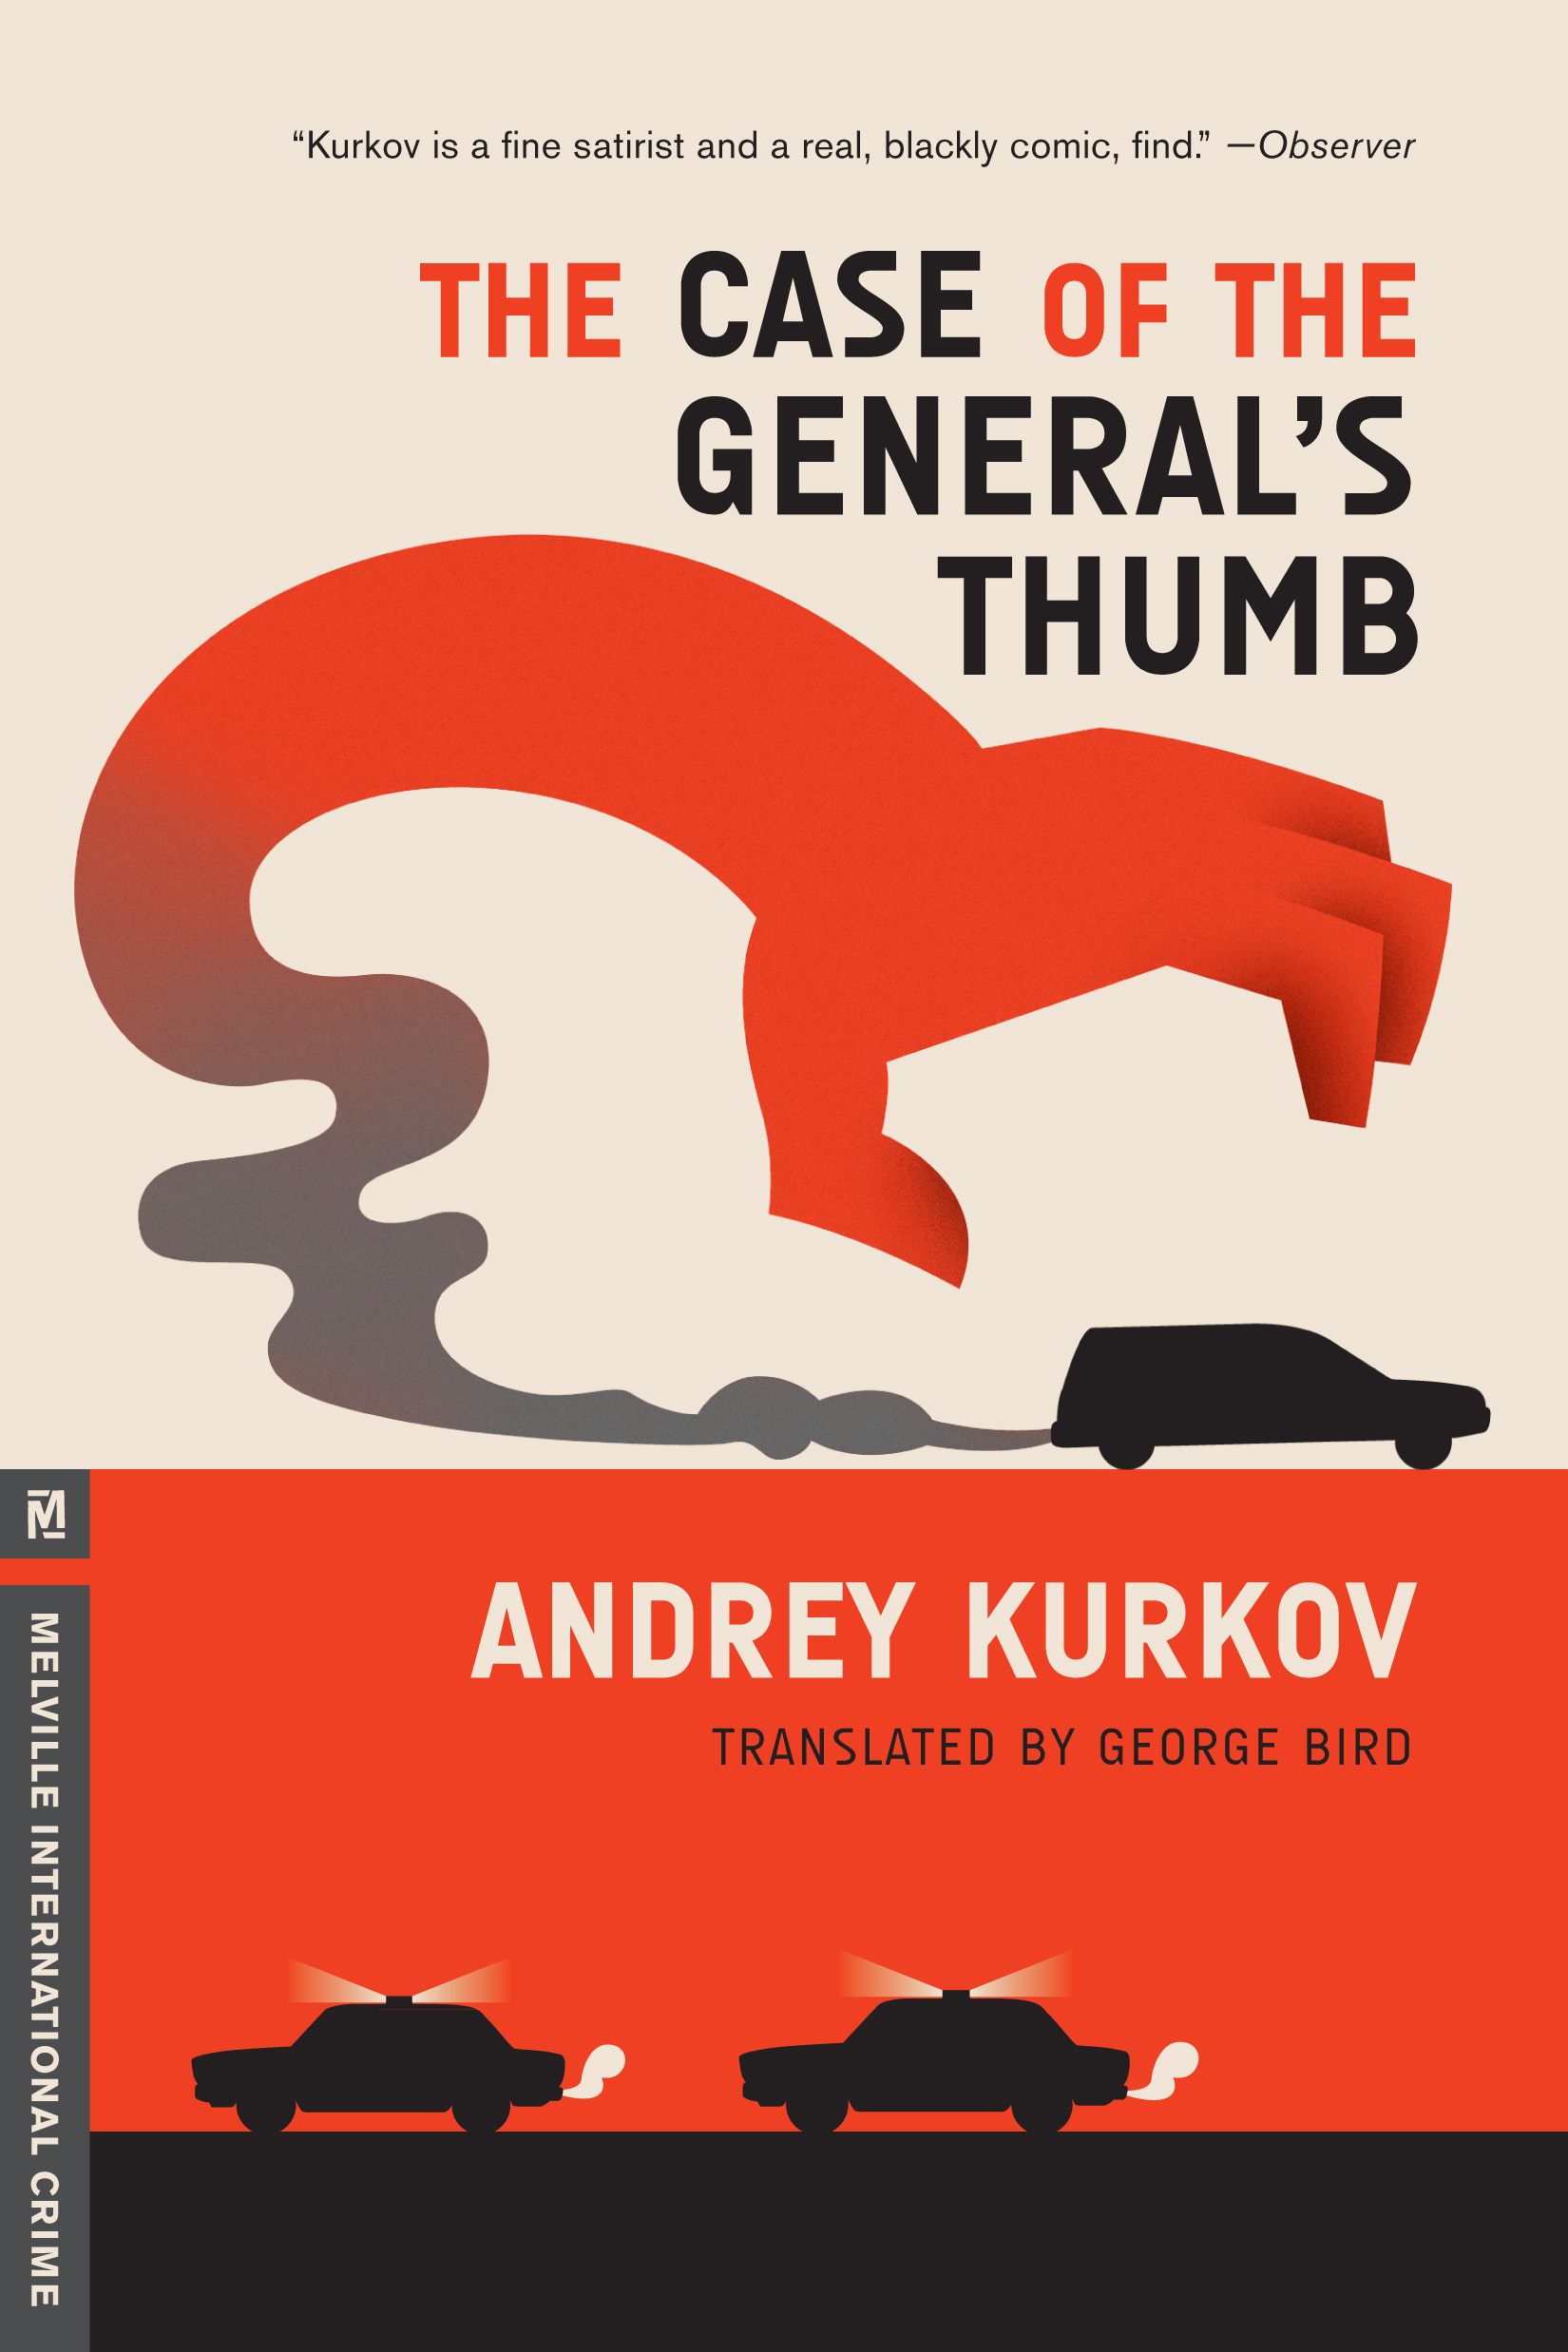 "The Ukraine as a Novel with Strong Plot and Weak Characters": Andrey Kurkov on tour